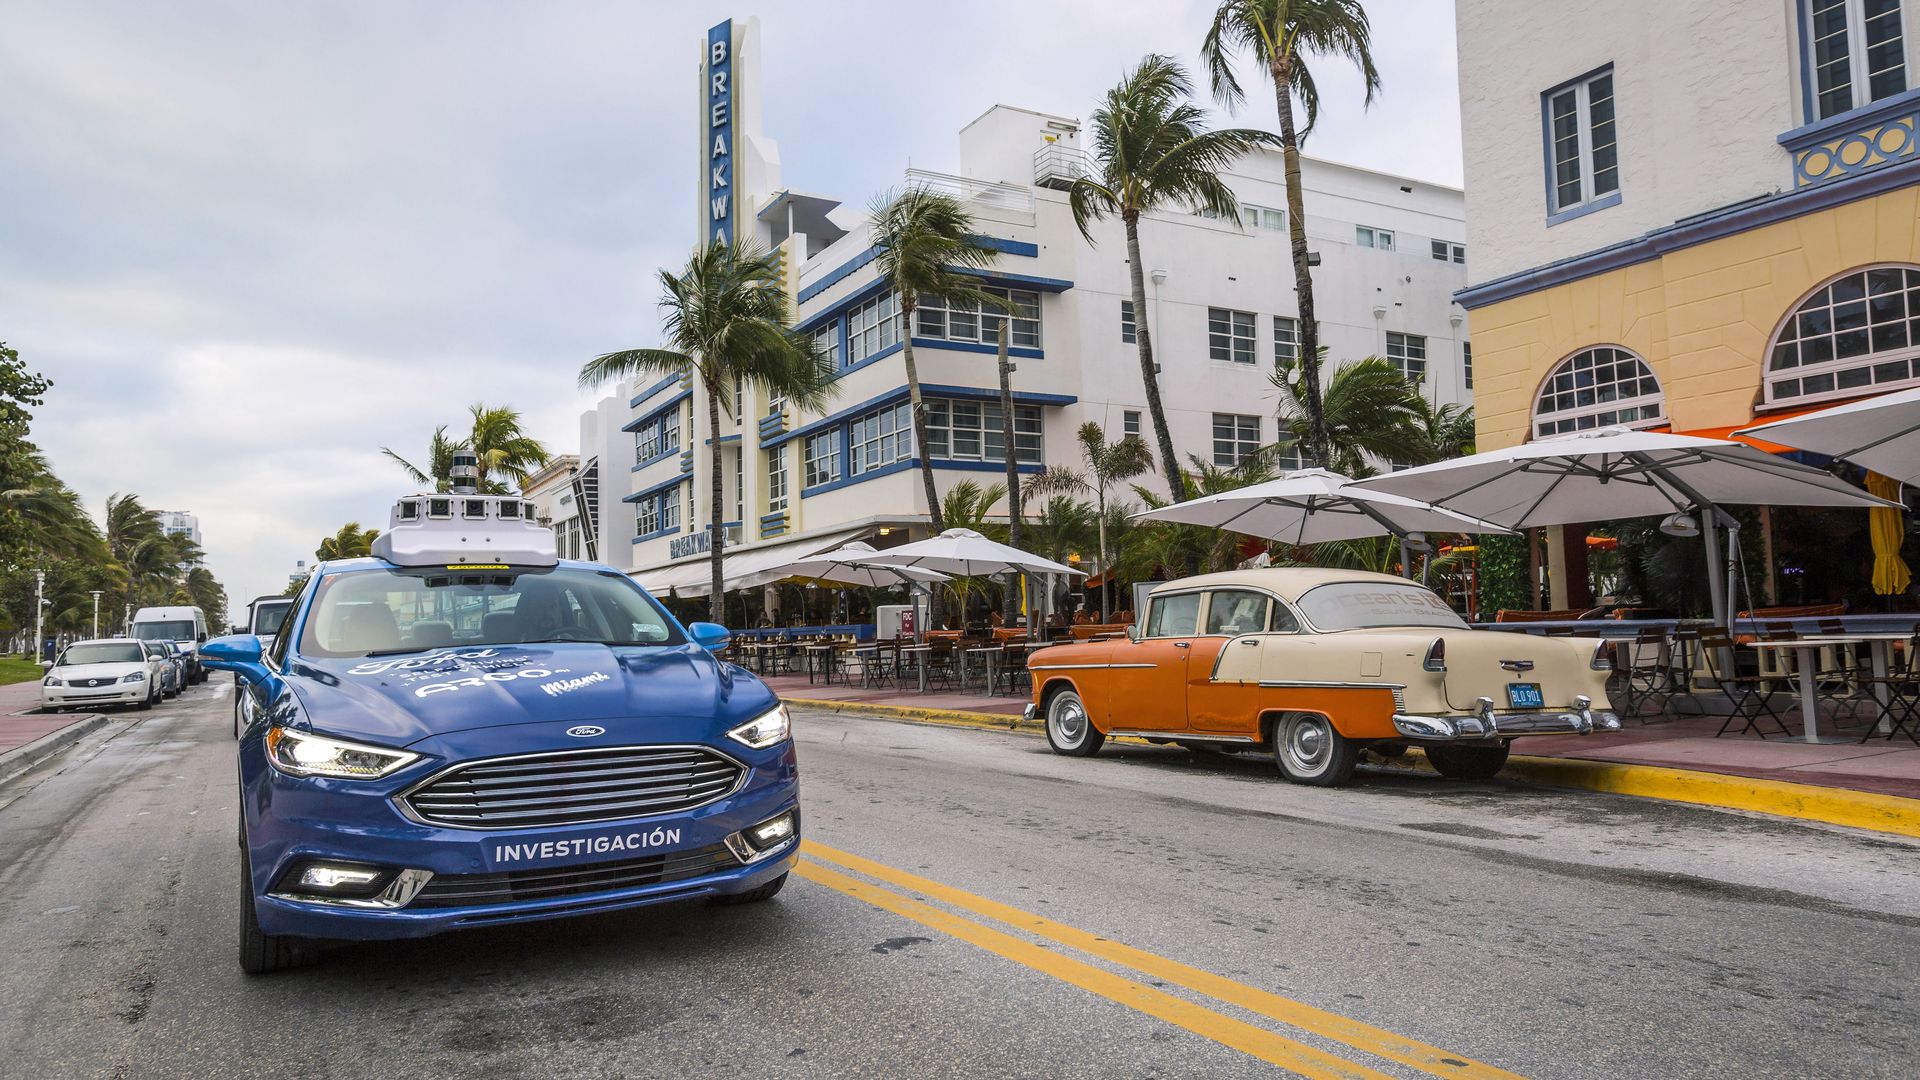 Image of Ford self-driving test vehicle in Miami